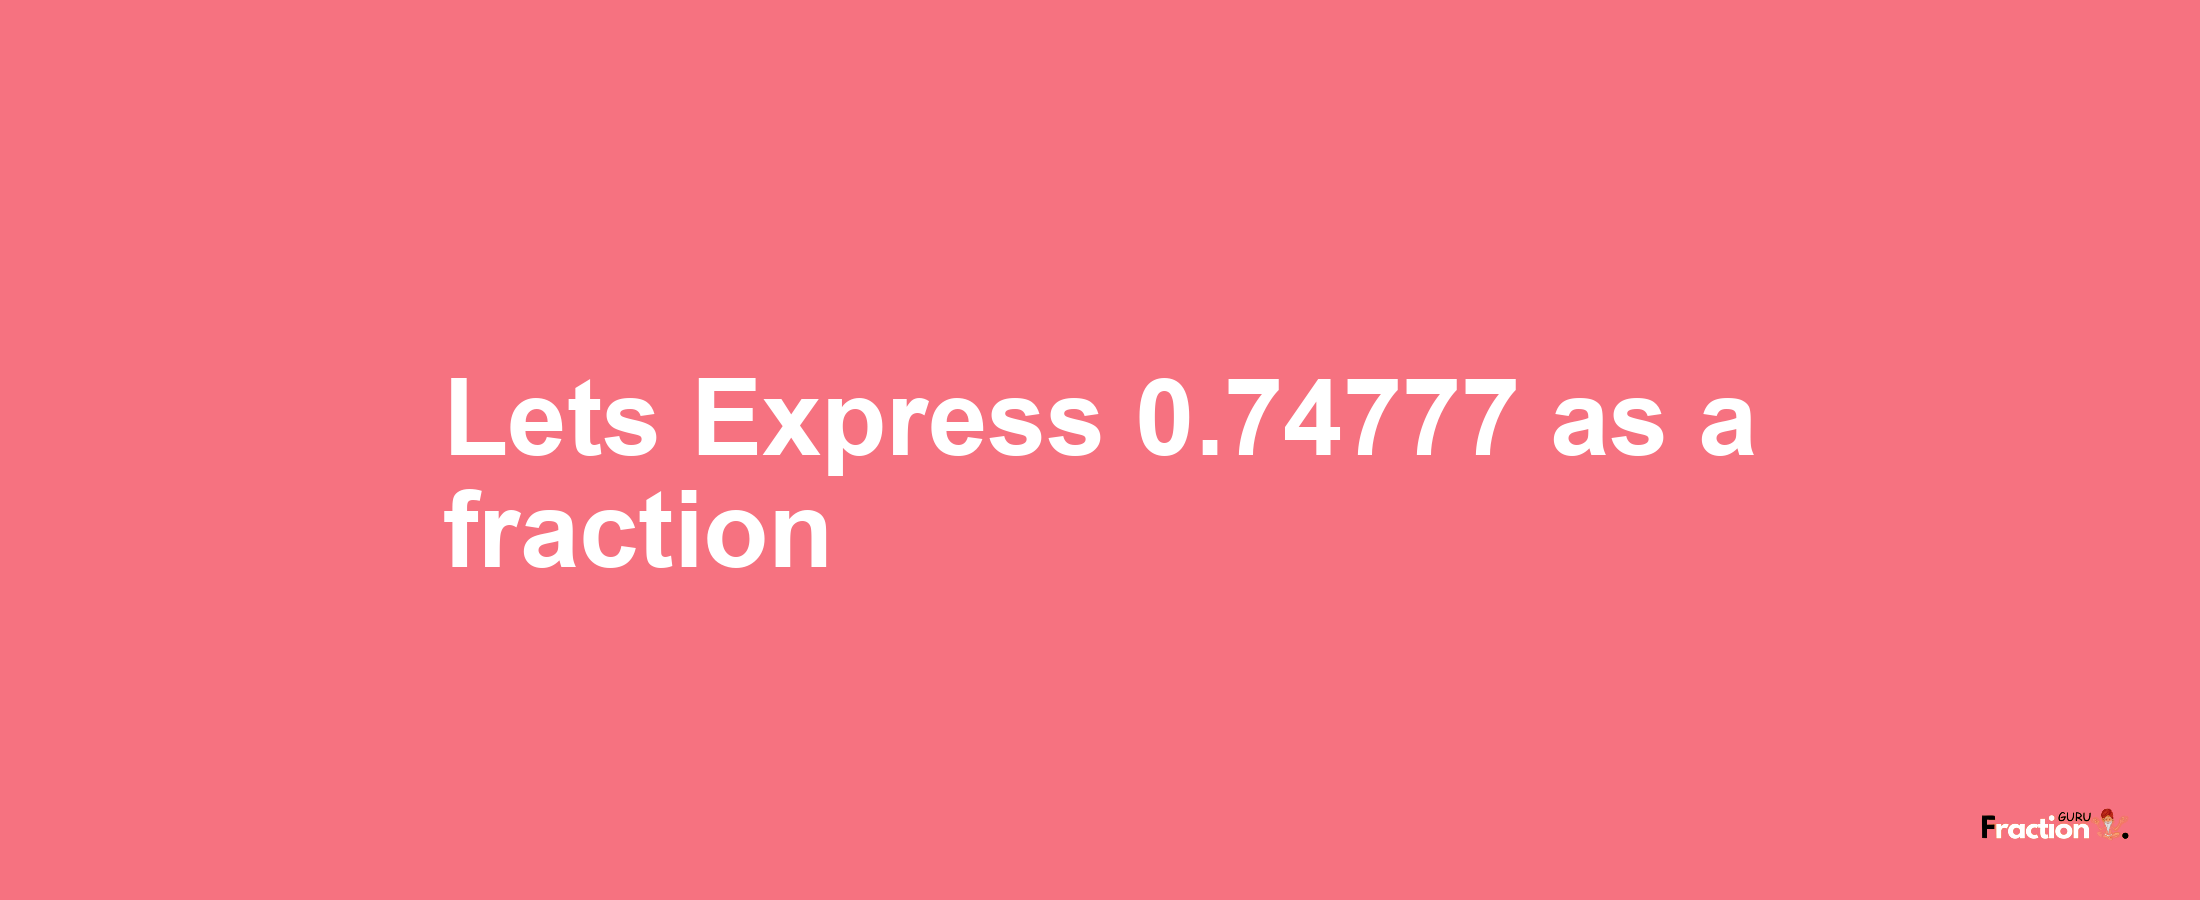 Lets Express 0.74777 as afraction